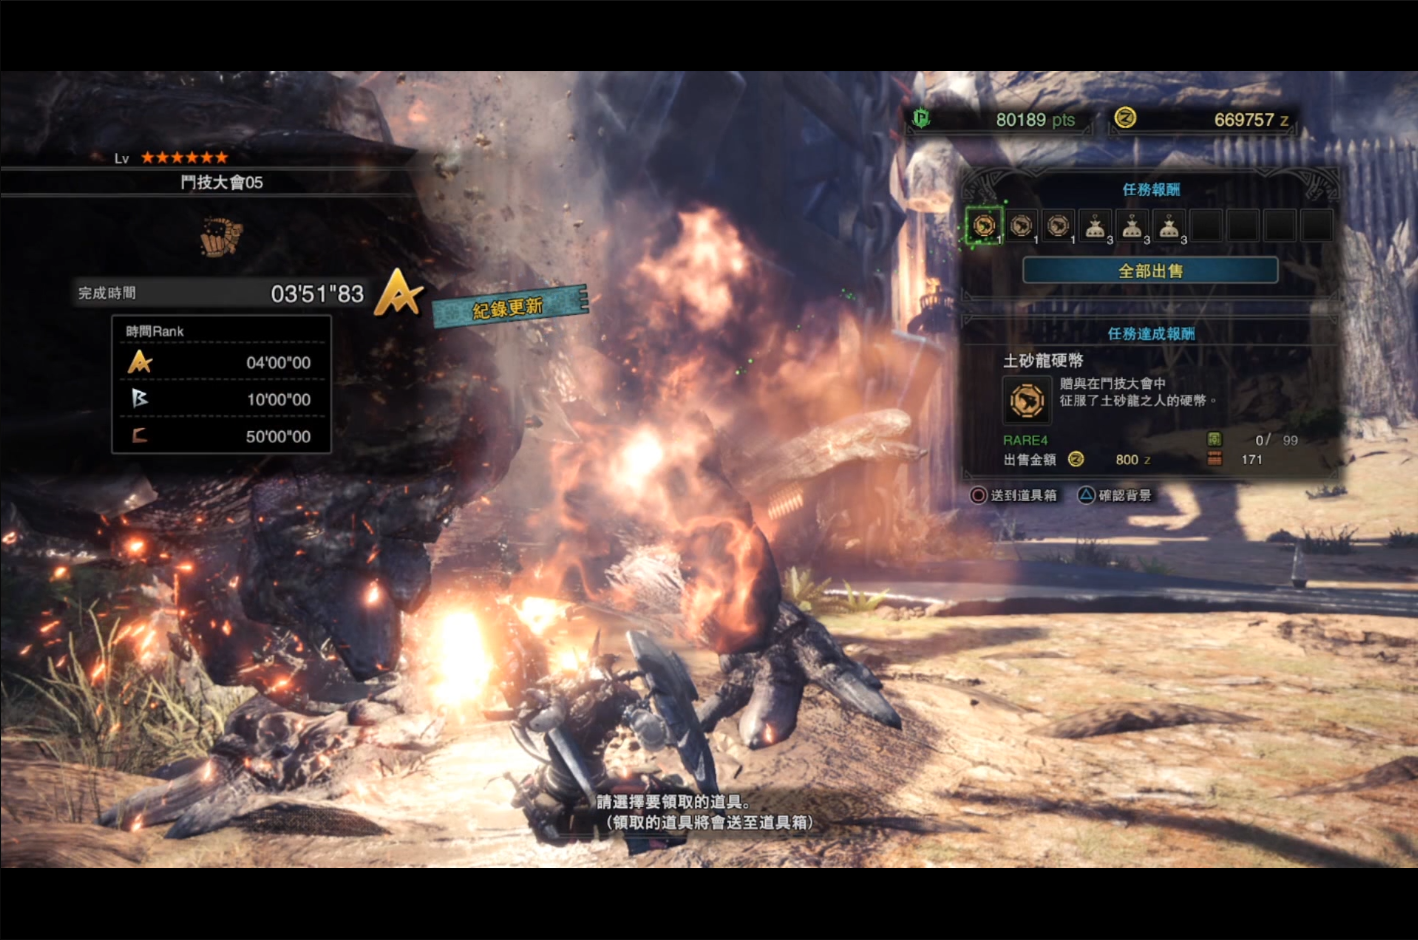 http://mhw.wiki-db.com/img/arena_rec000000013/1529352767.83.png